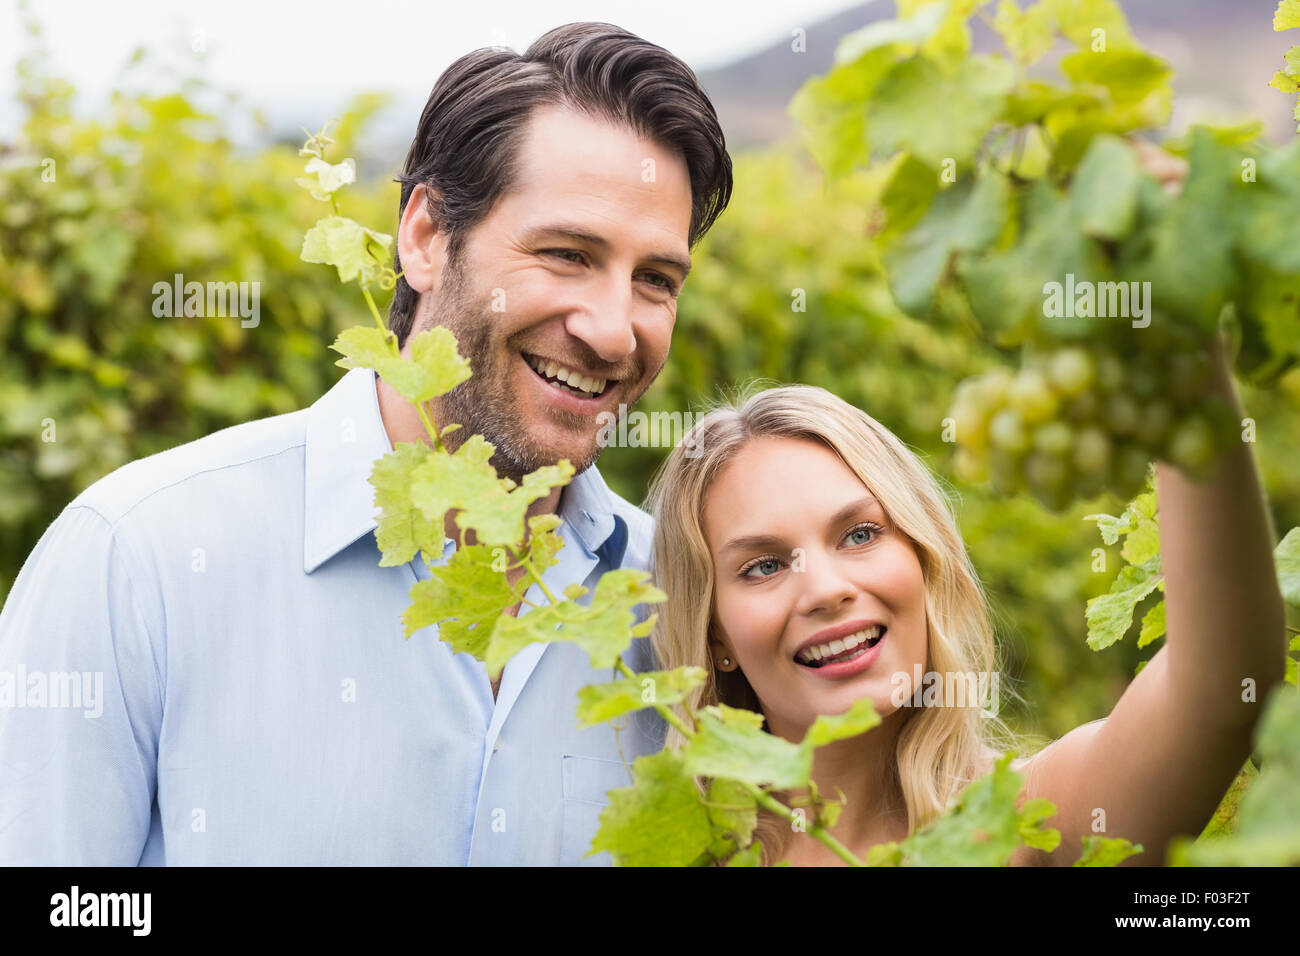 Young happy couple looking at grapes Stock Photo